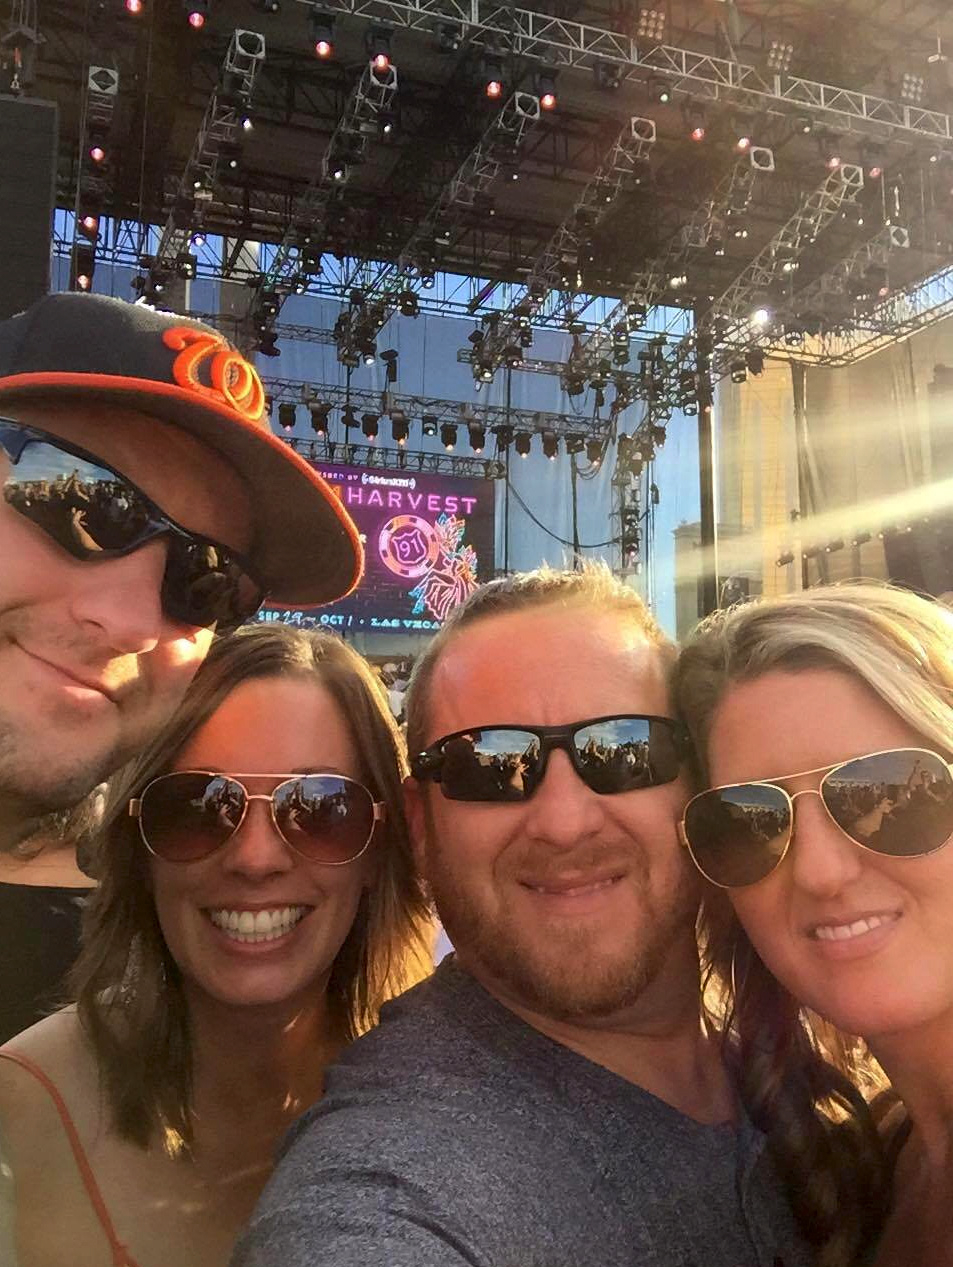 Trisha Leifsen, far right, attended the Route 91 music festival with, from left, her brother Jaycob Collins, sister-in-law Carrie Collins and husband Thad Leifsen. They were in the crowd when a gunman opened fire on concertgoers on Sunday.